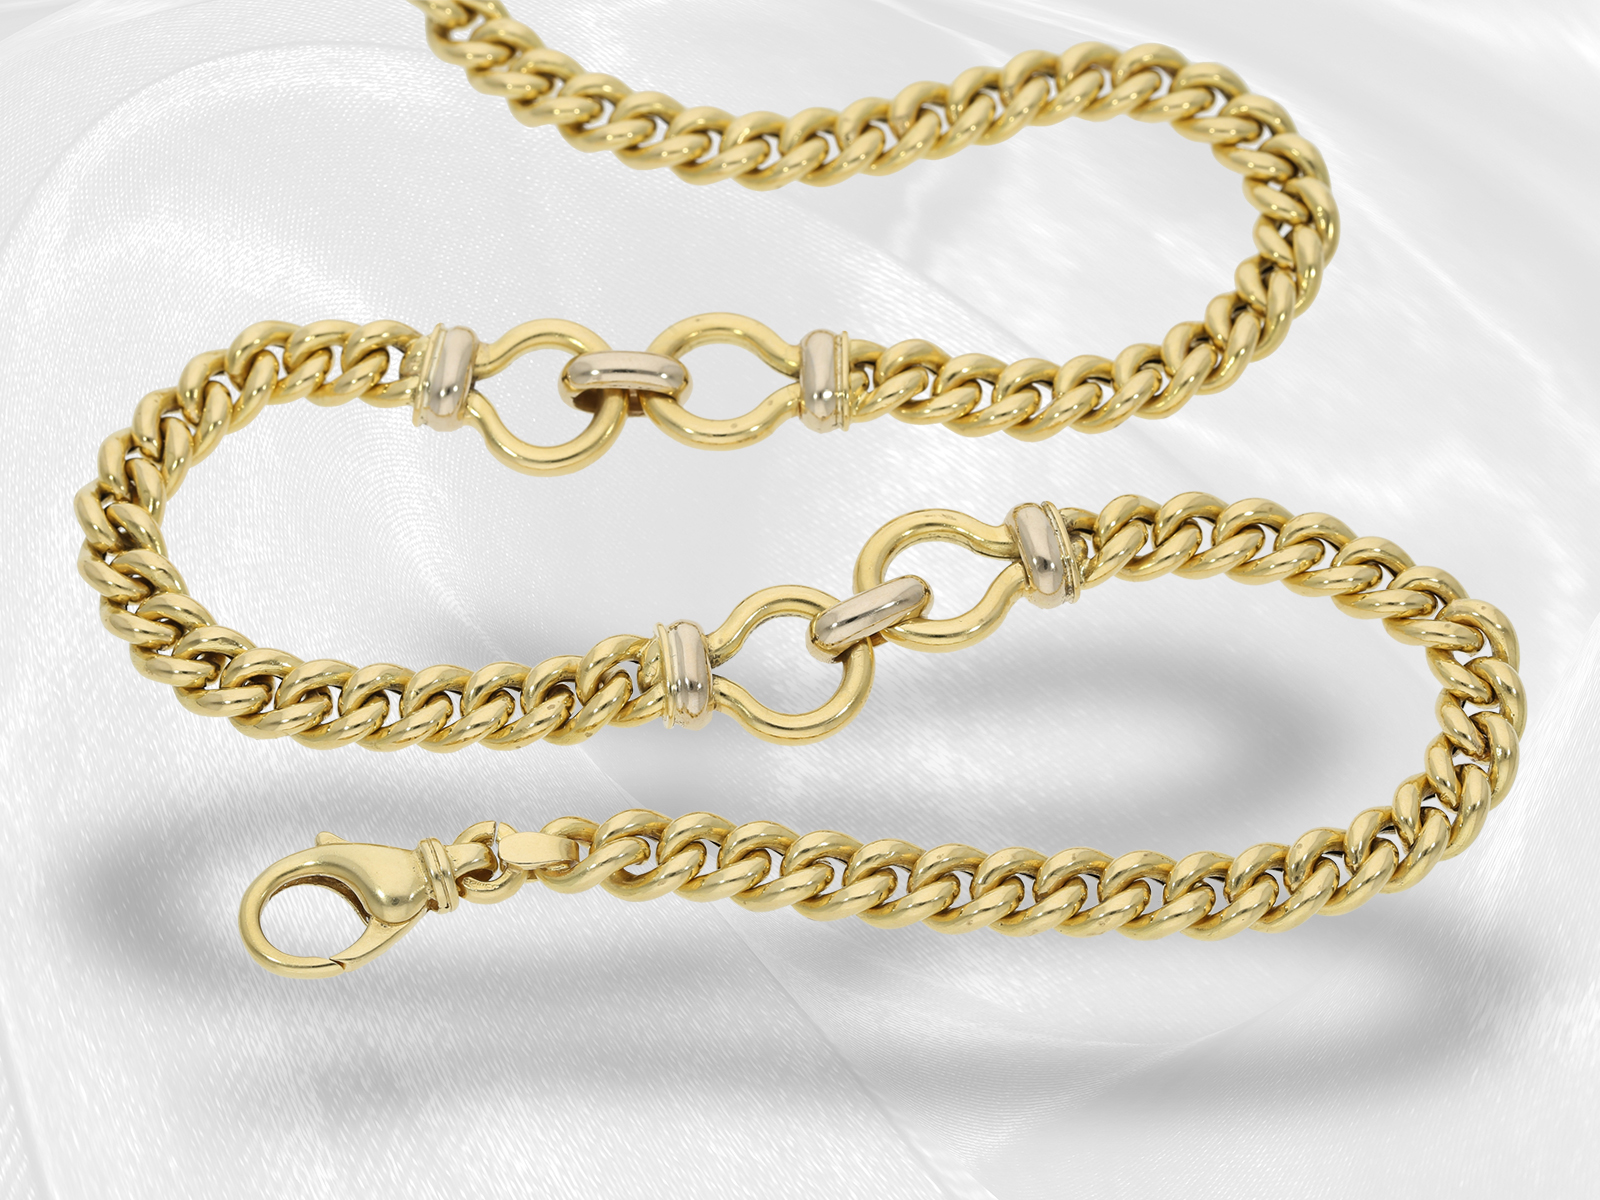 Chain/Collier: luxury long designer gold necklace, 18K gold - Image 5 of 7